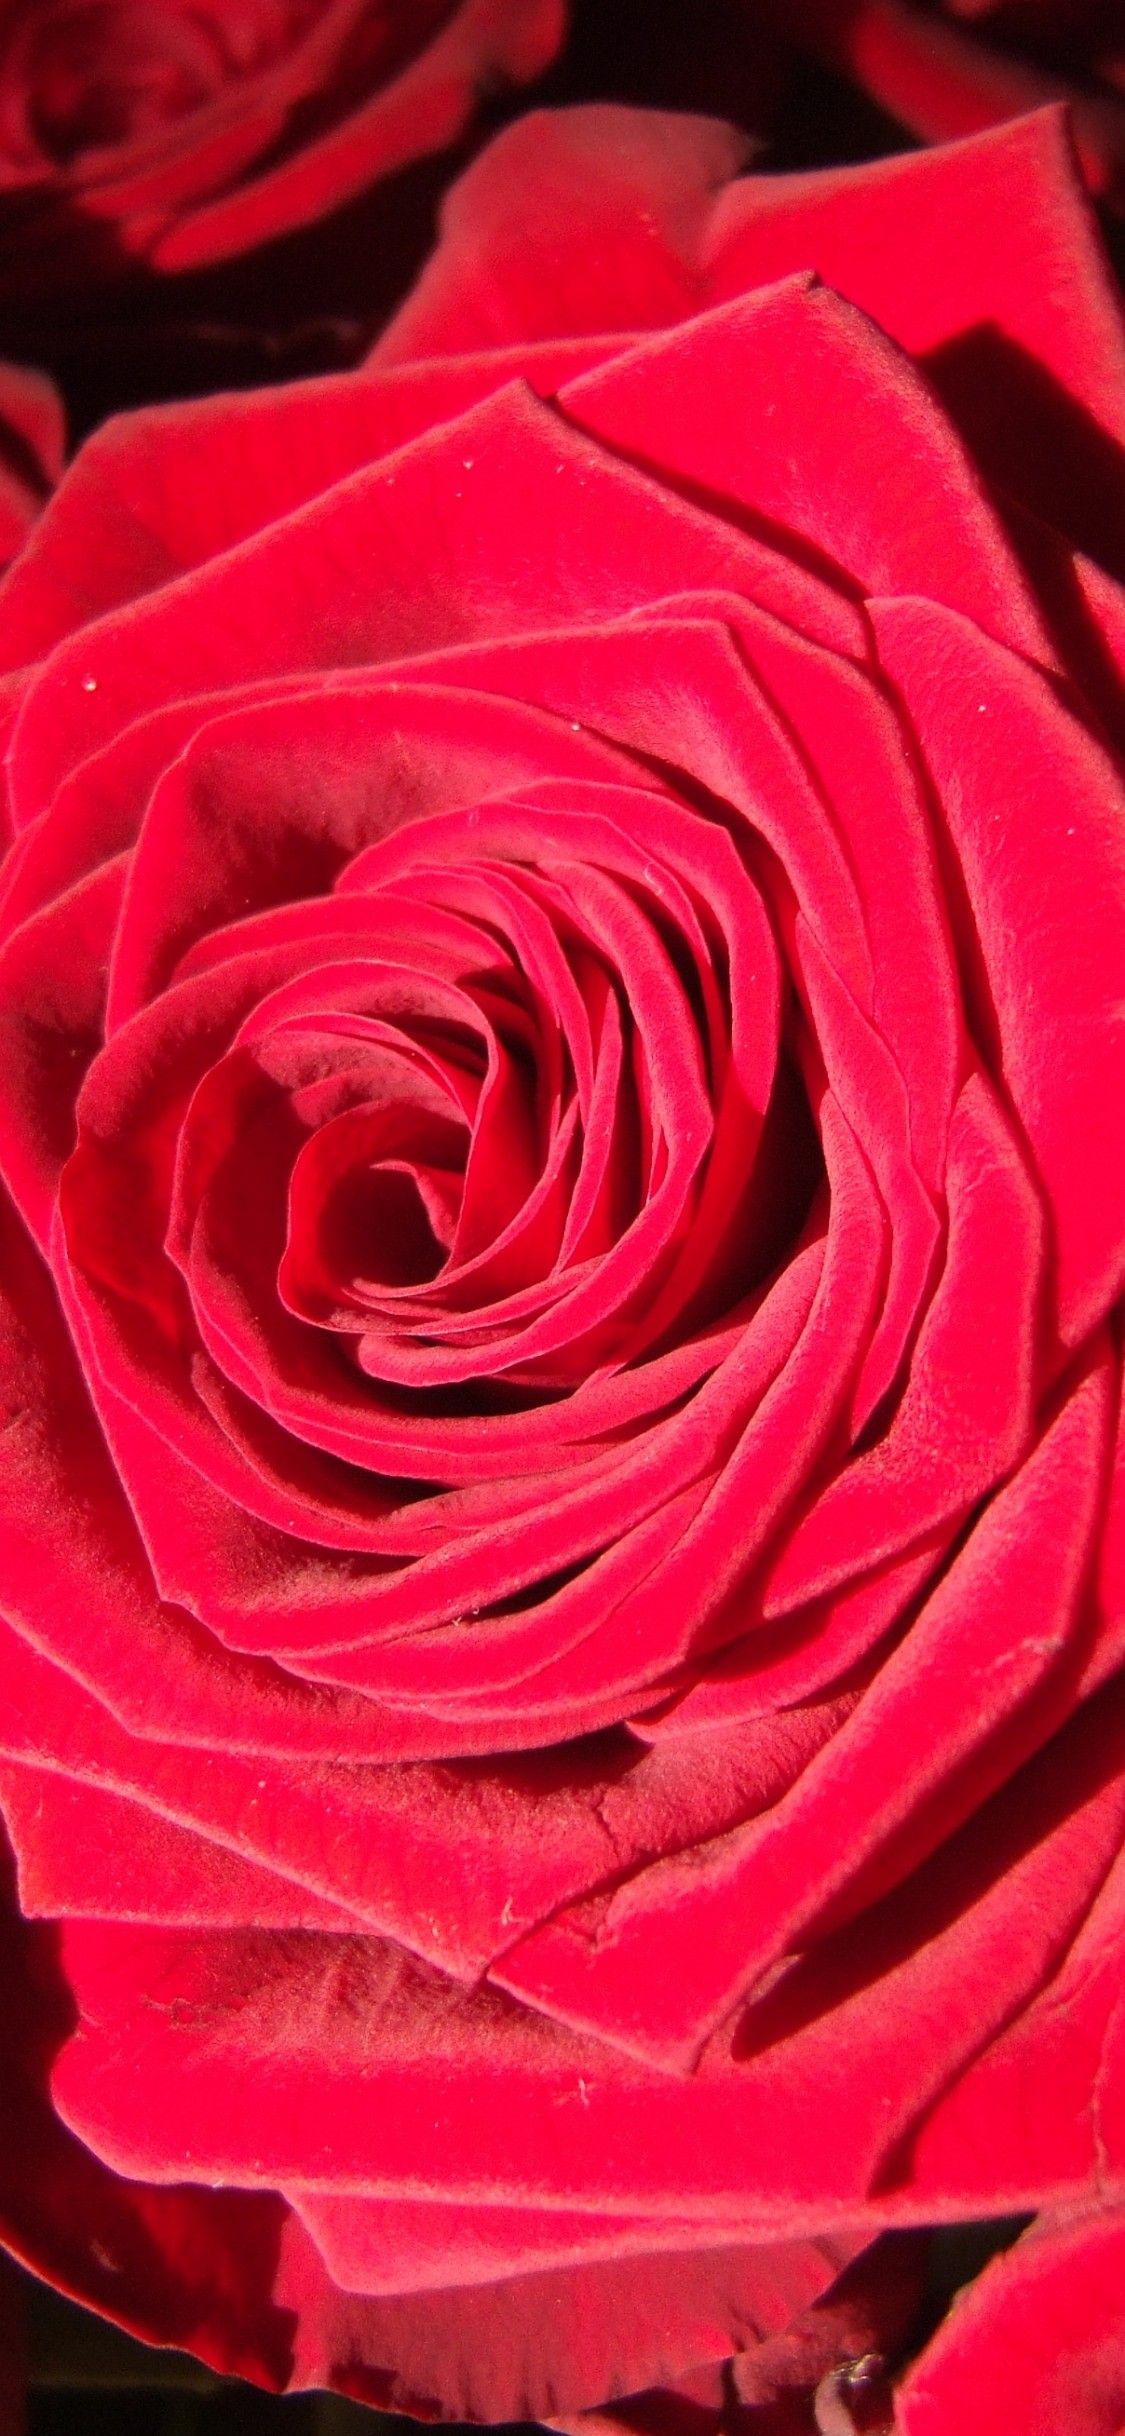 HD Red Roses iPhone Wallpaper and image collection for Desktop